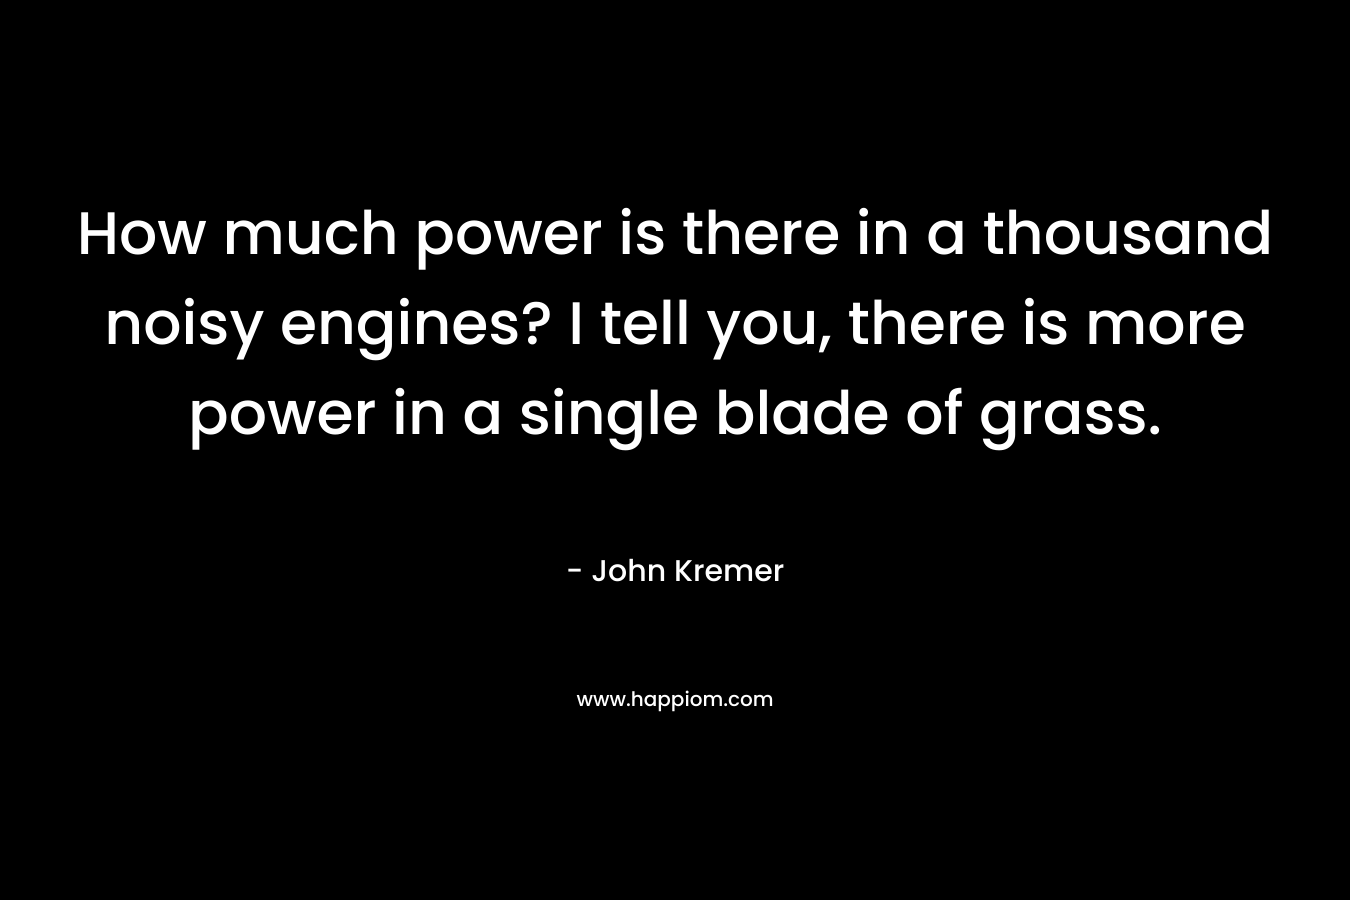 How much power is there in a thousand noisy engines? I tell you, there is more power in a single blade of grass. – John Kremer